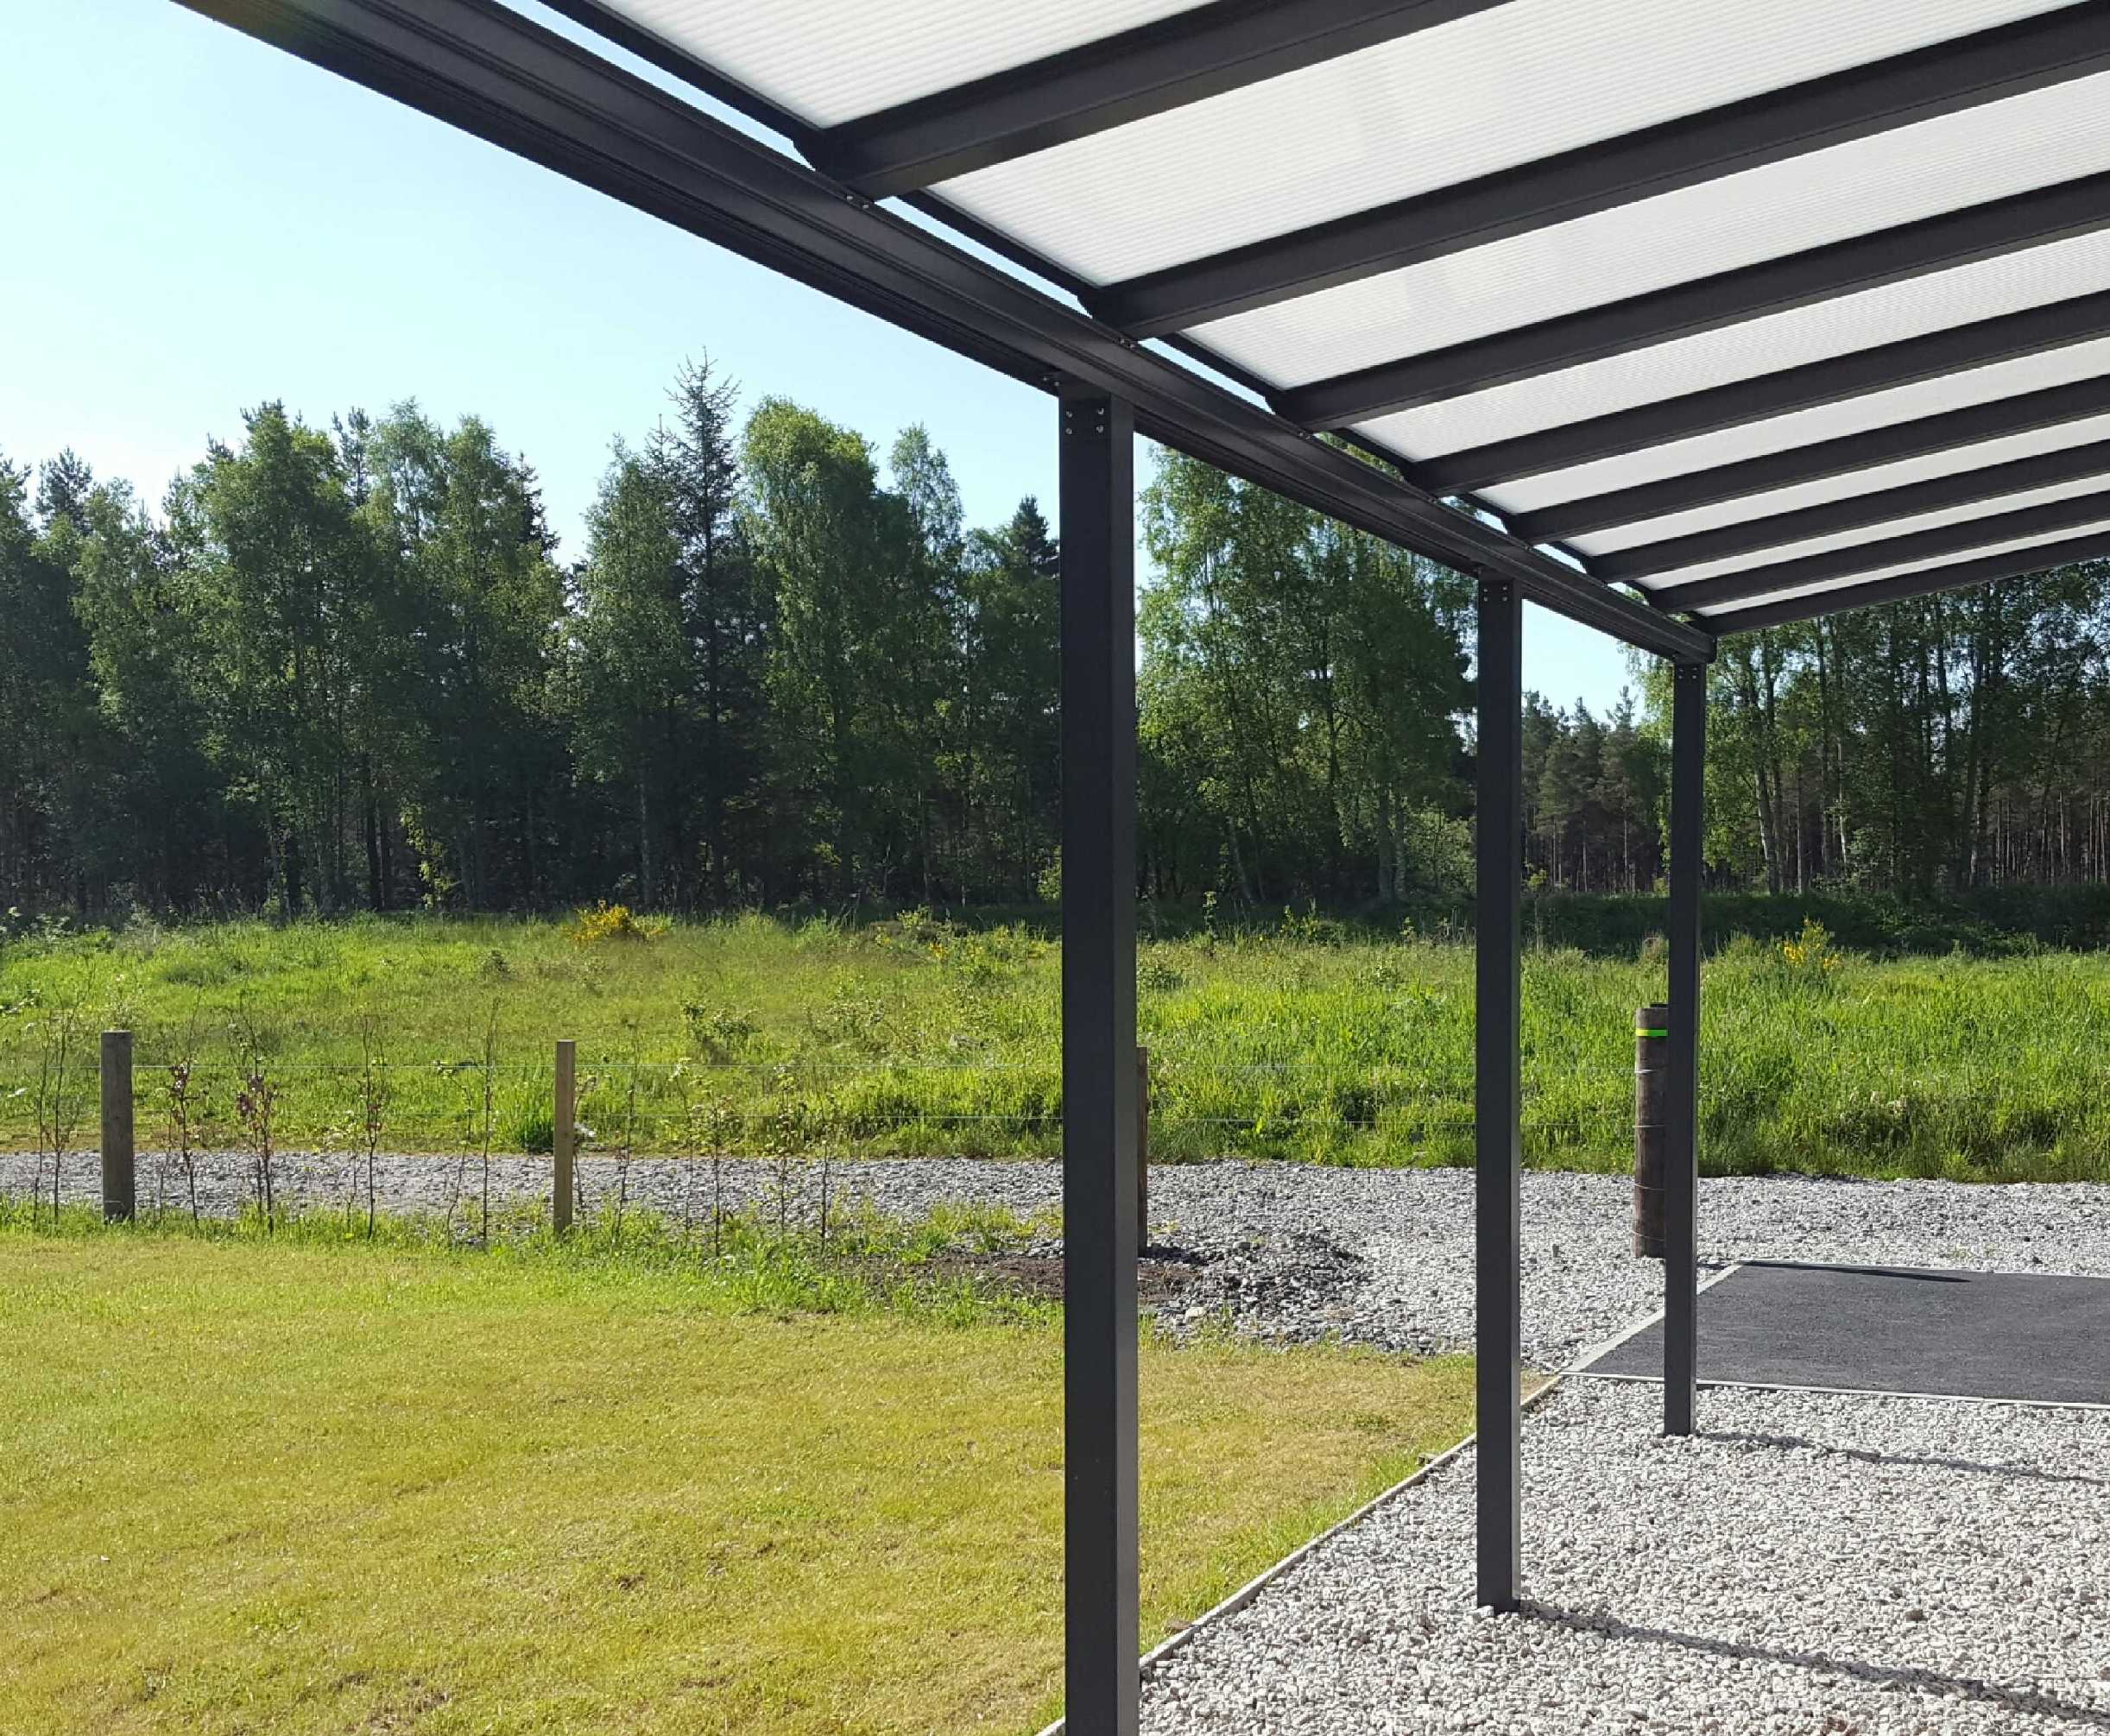 Omega Smart Lean-To Canopy, Anthracite Grey, 6mm Glass Clear Plate Polycarbonate Glazing - 9.1m (W) x 3.0m (P), (5) Supporting Posts